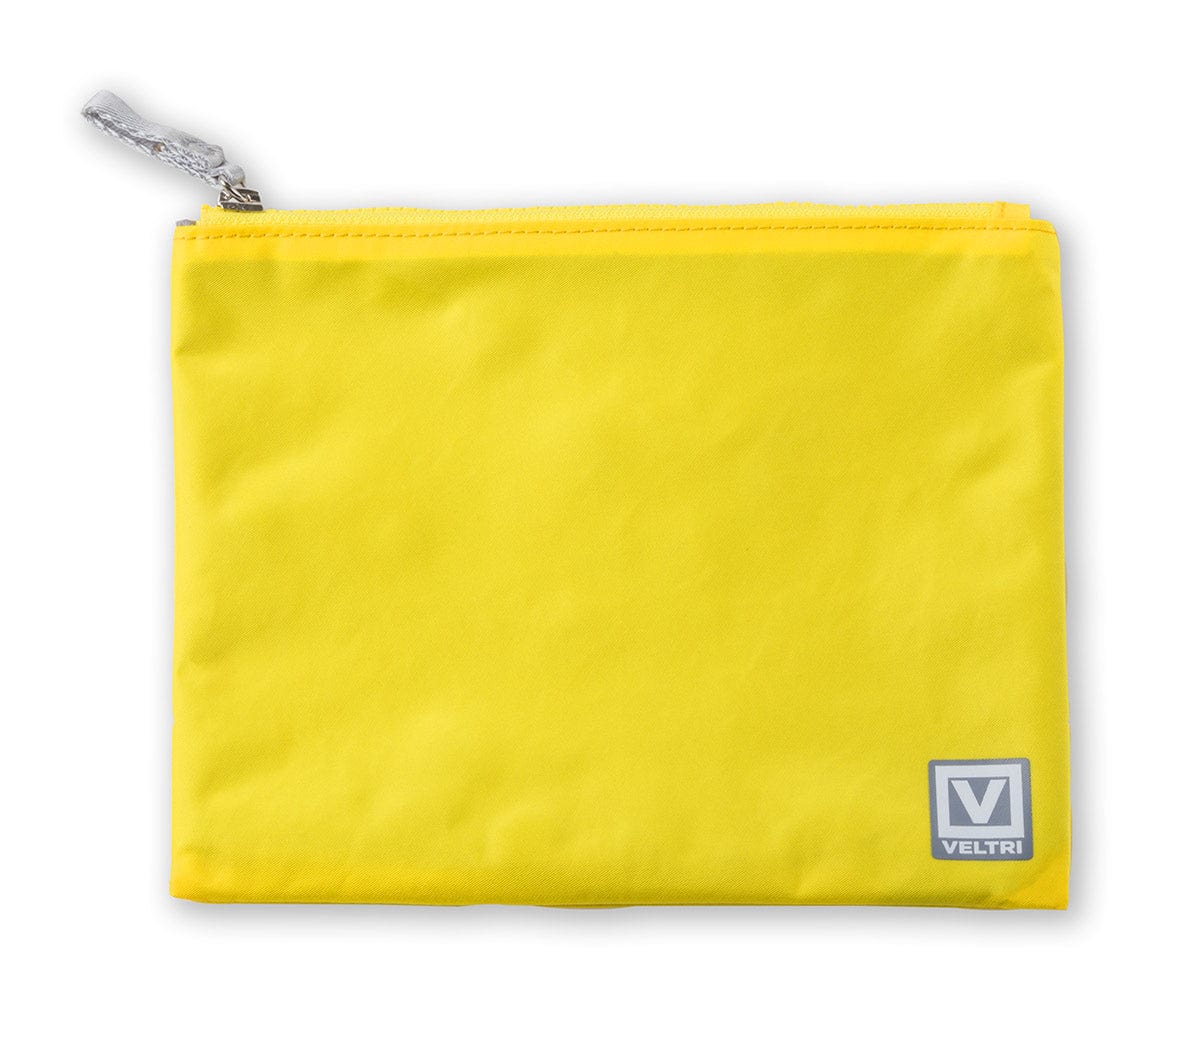 Veltri Yellow VELTRI- Zip Pouch equestrian team apparel online tack store mobile tack store custom farm apparel custom show stable clothing equestrian lifestyle horse show clothing riding clothes horses equestrian tack store